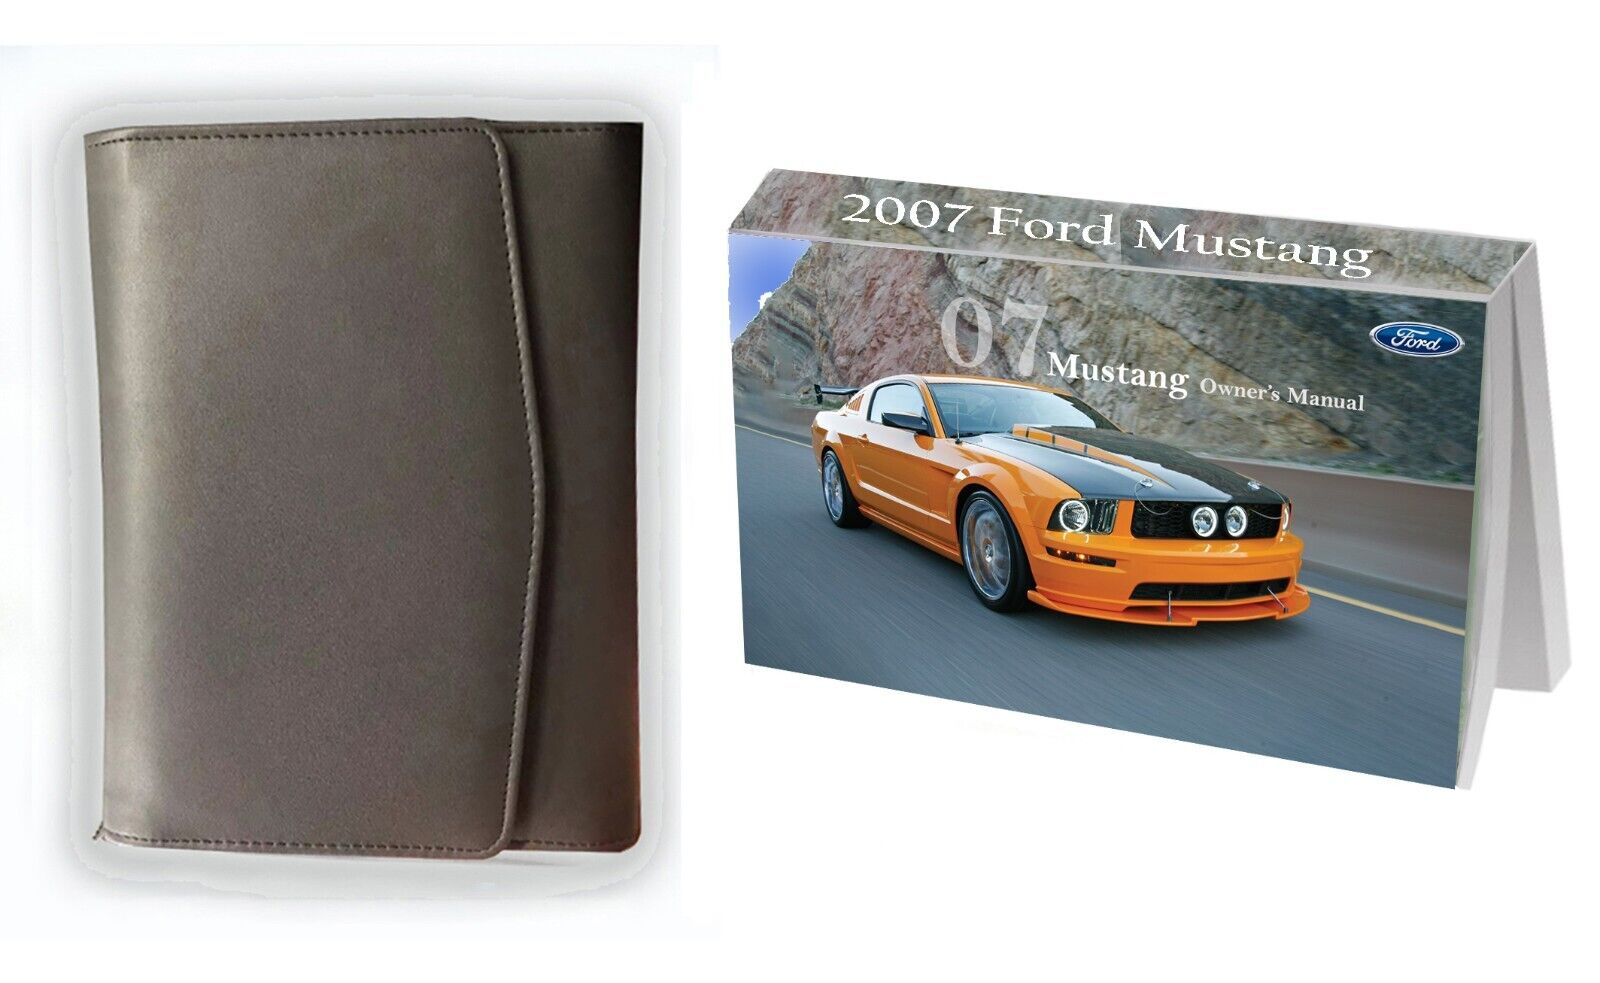 Owner Manual for 2007 Ford Mustang, Owner's Manual Factory Glovebox Book